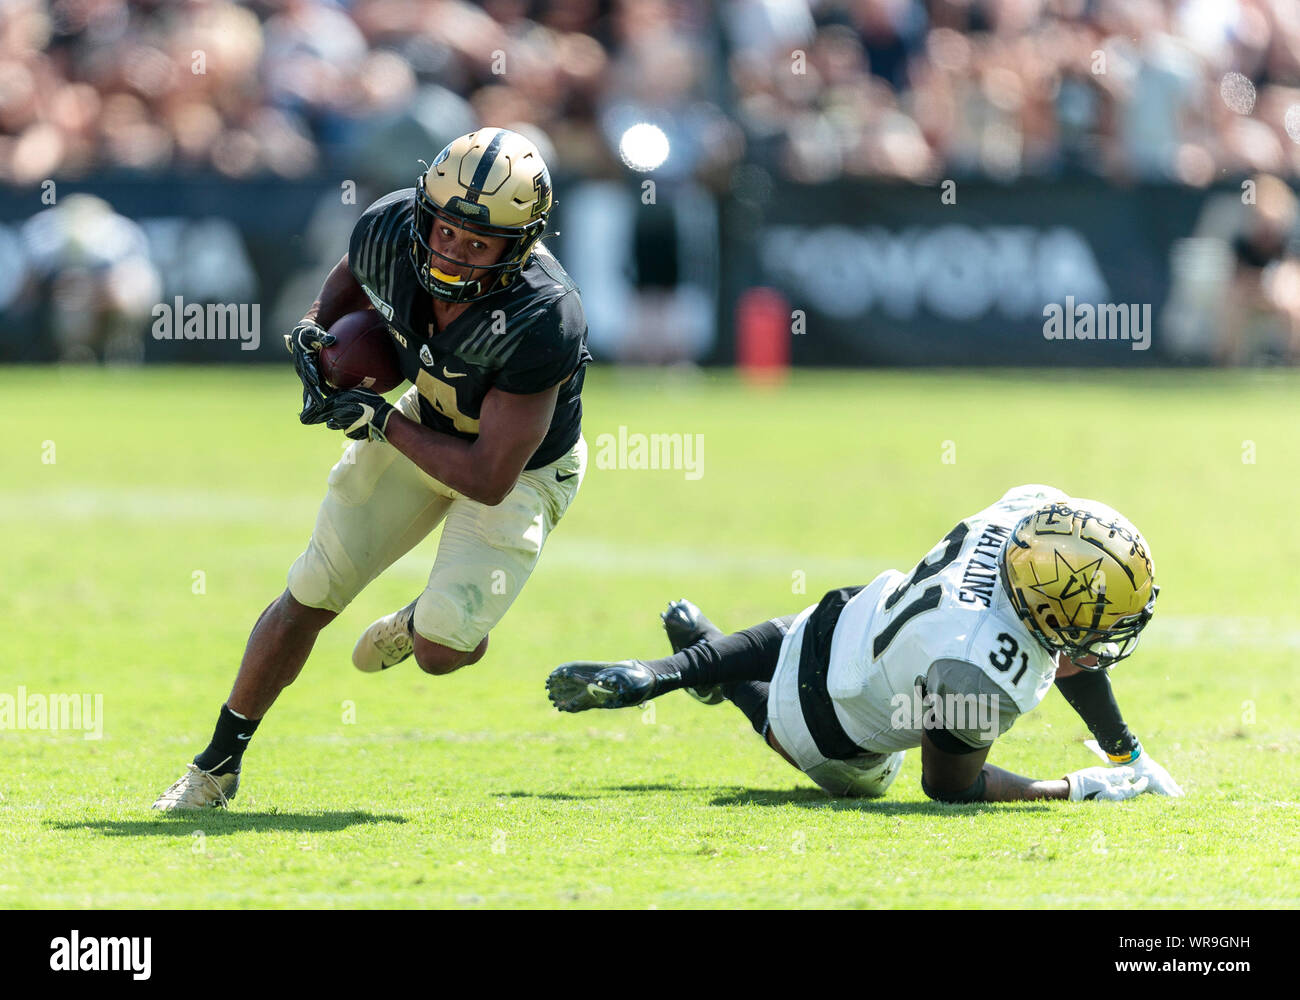 West Lafayette, Indiana, USA. 07th Sep, 2019. Purdue wide receiver Rondale Moore (4) catches the ball as Vanderbilt defensive back Cam Watkins (31) defends during NCAA football game action between the Vanderbilt Commodores and the Purdue Boilermakers at Ross-Ade Stadium in West Lafayette, Indiana. Purdue defeated Vanderbilt 42-24. John Mersits/CSM/Alamy Live News Stock Photo